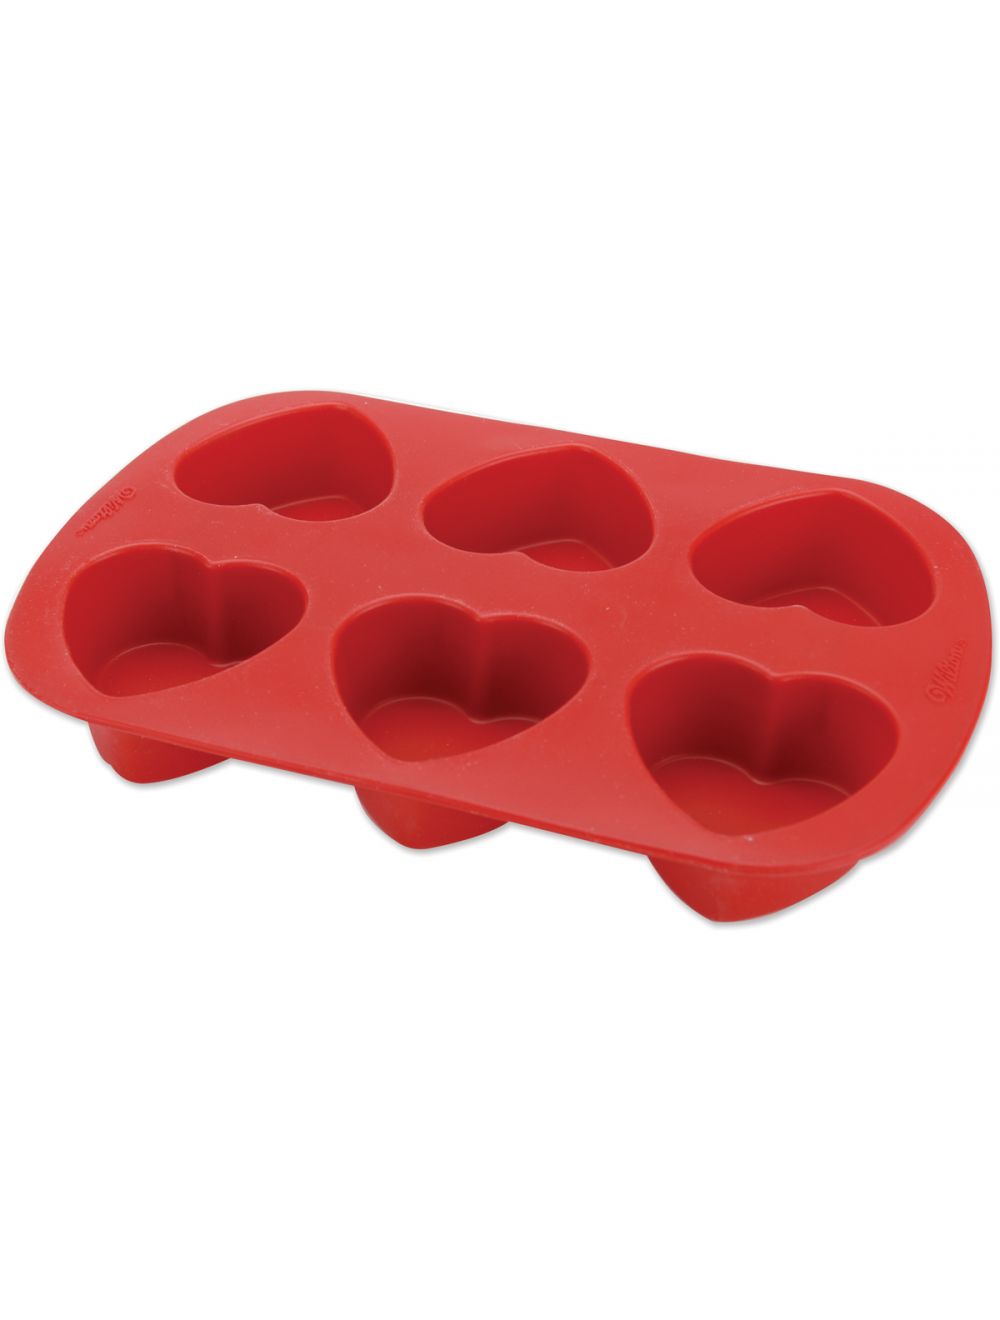 Wilton 6 CAVITY SILICONE HEART MOLD - The Westview Shop